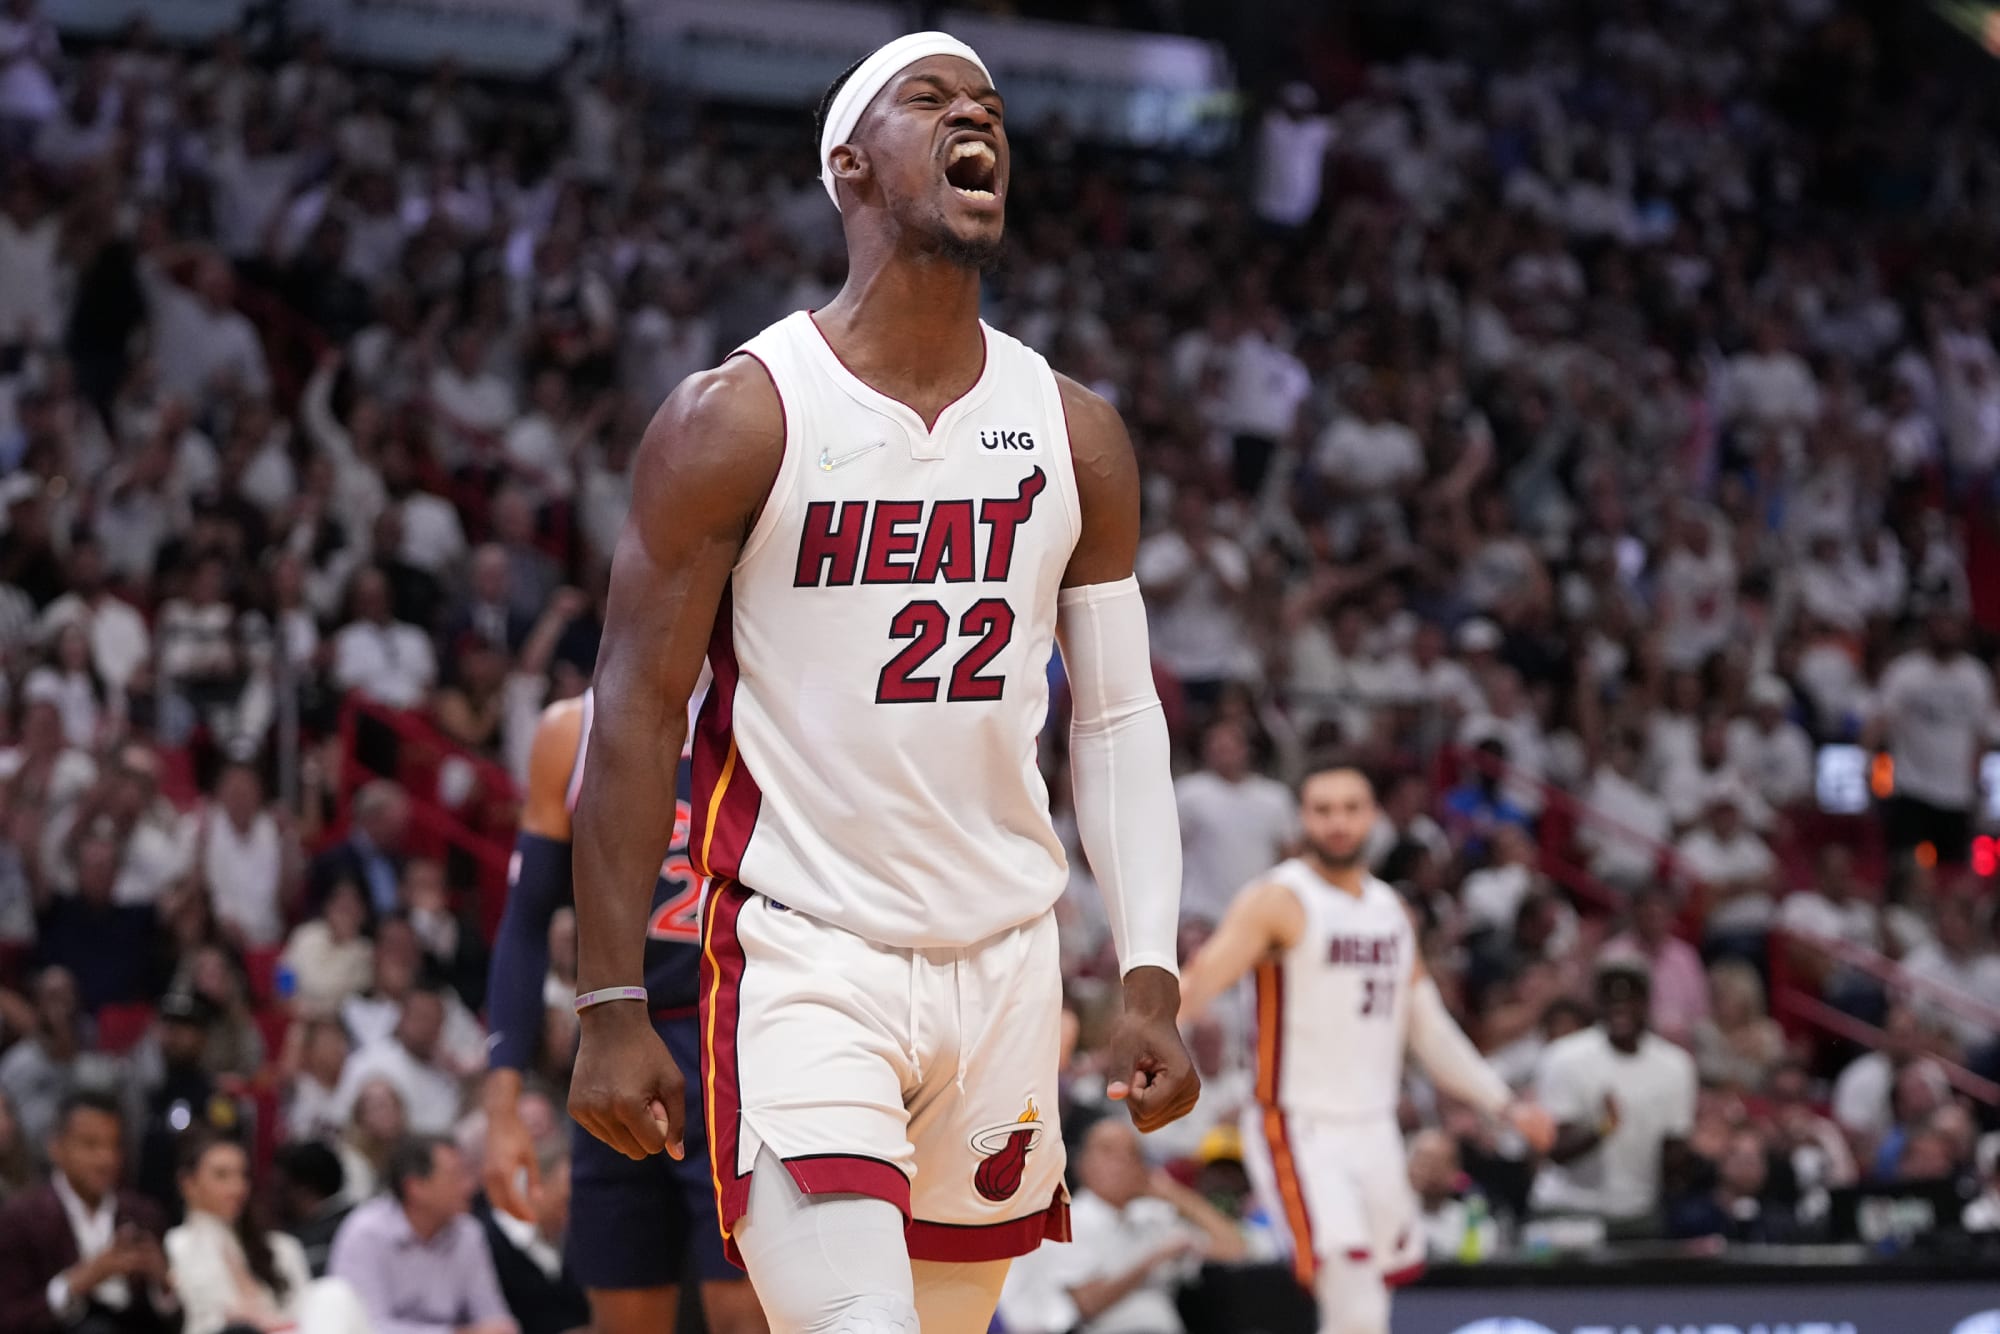 Miami Heat Playoffs: Scoring Tables Turned In Game 5 But How Much?